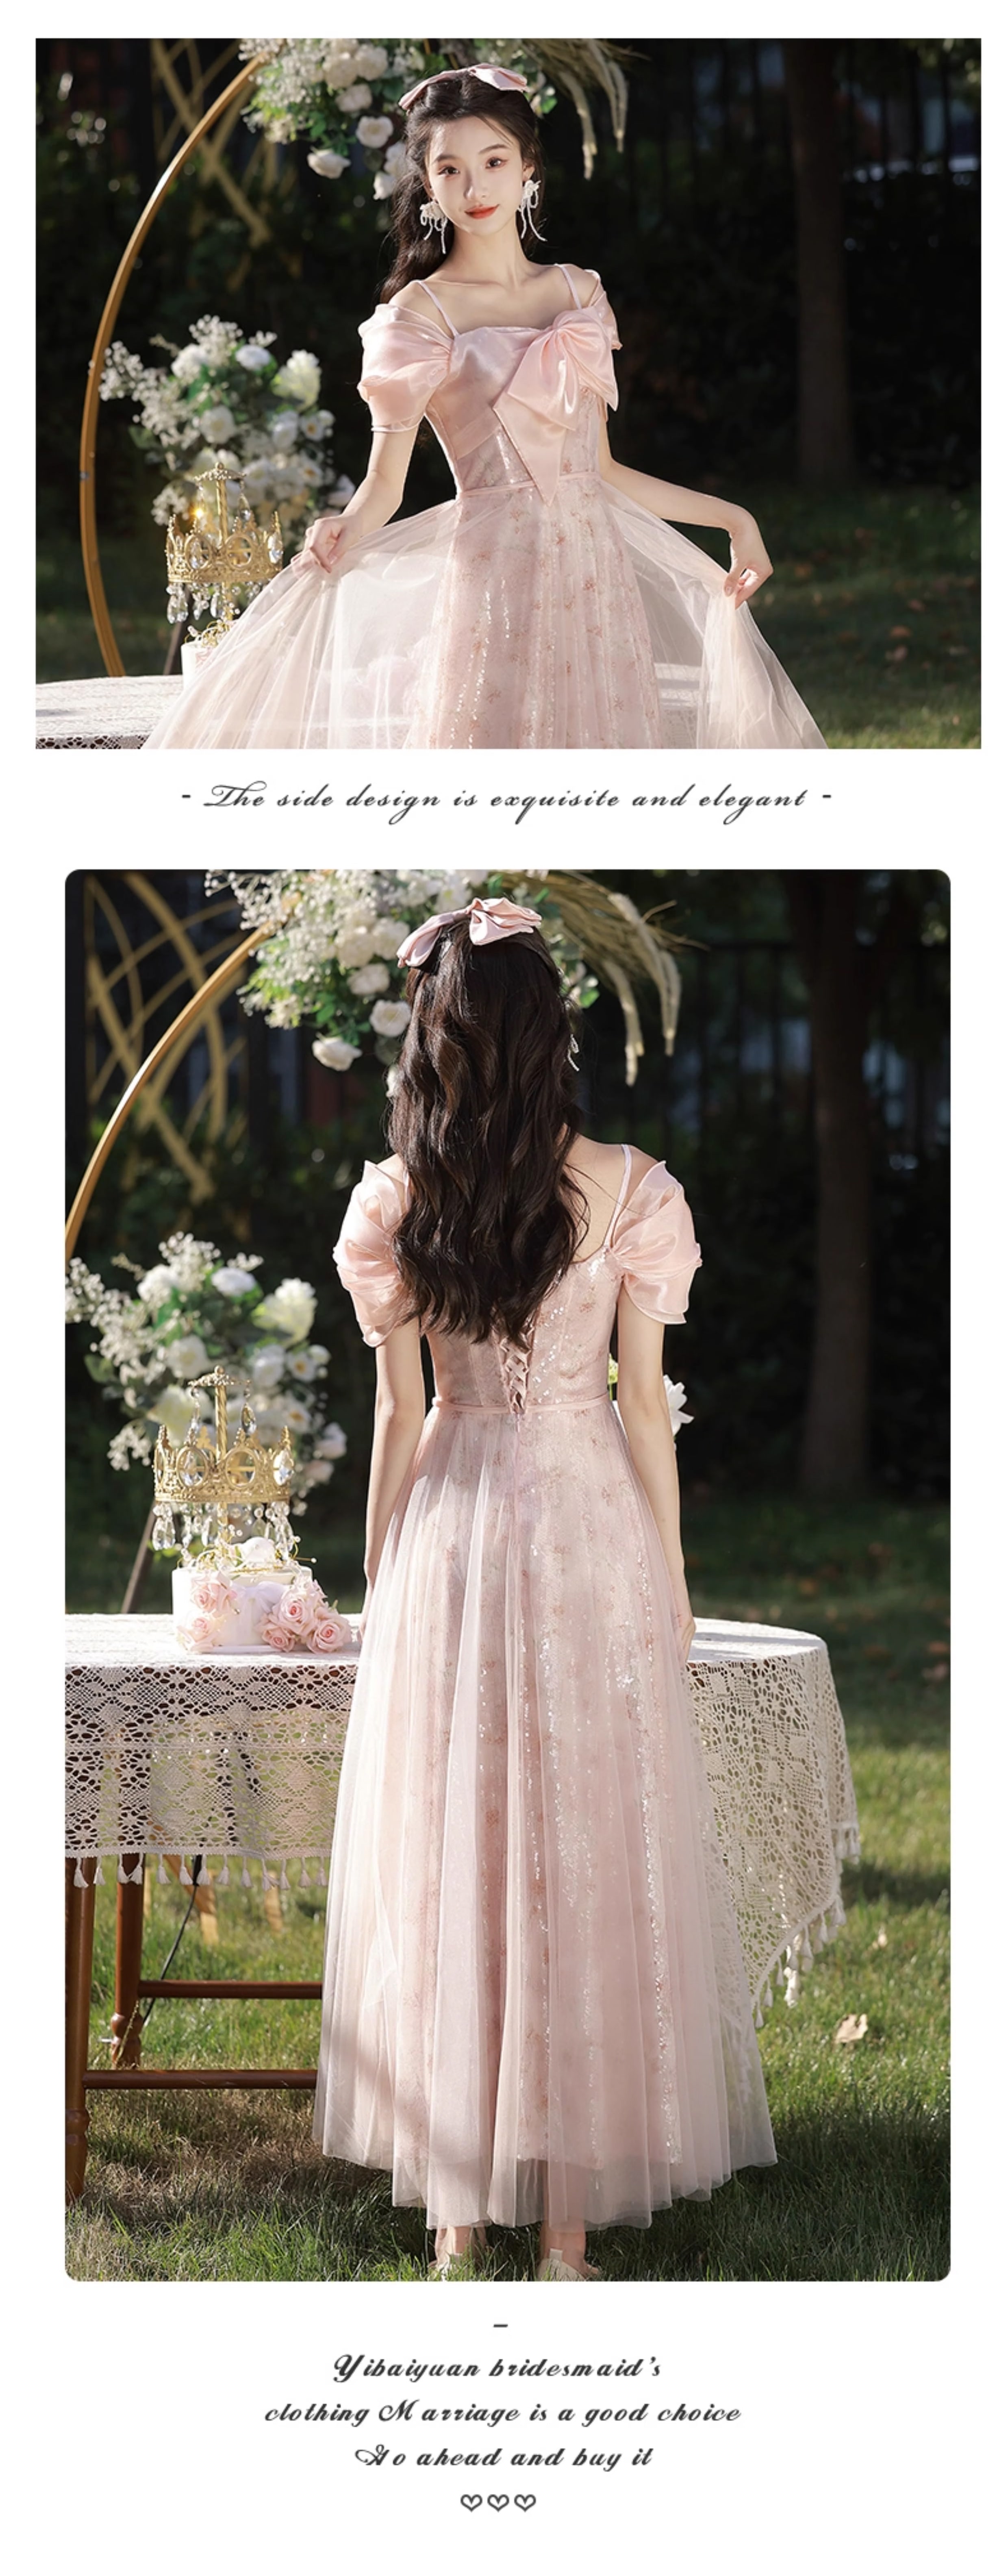 Classy-Pink-Tulle-Floral-Evening-Party-Cocktail-Prom-Bridesmaid-Maxi-Dress21